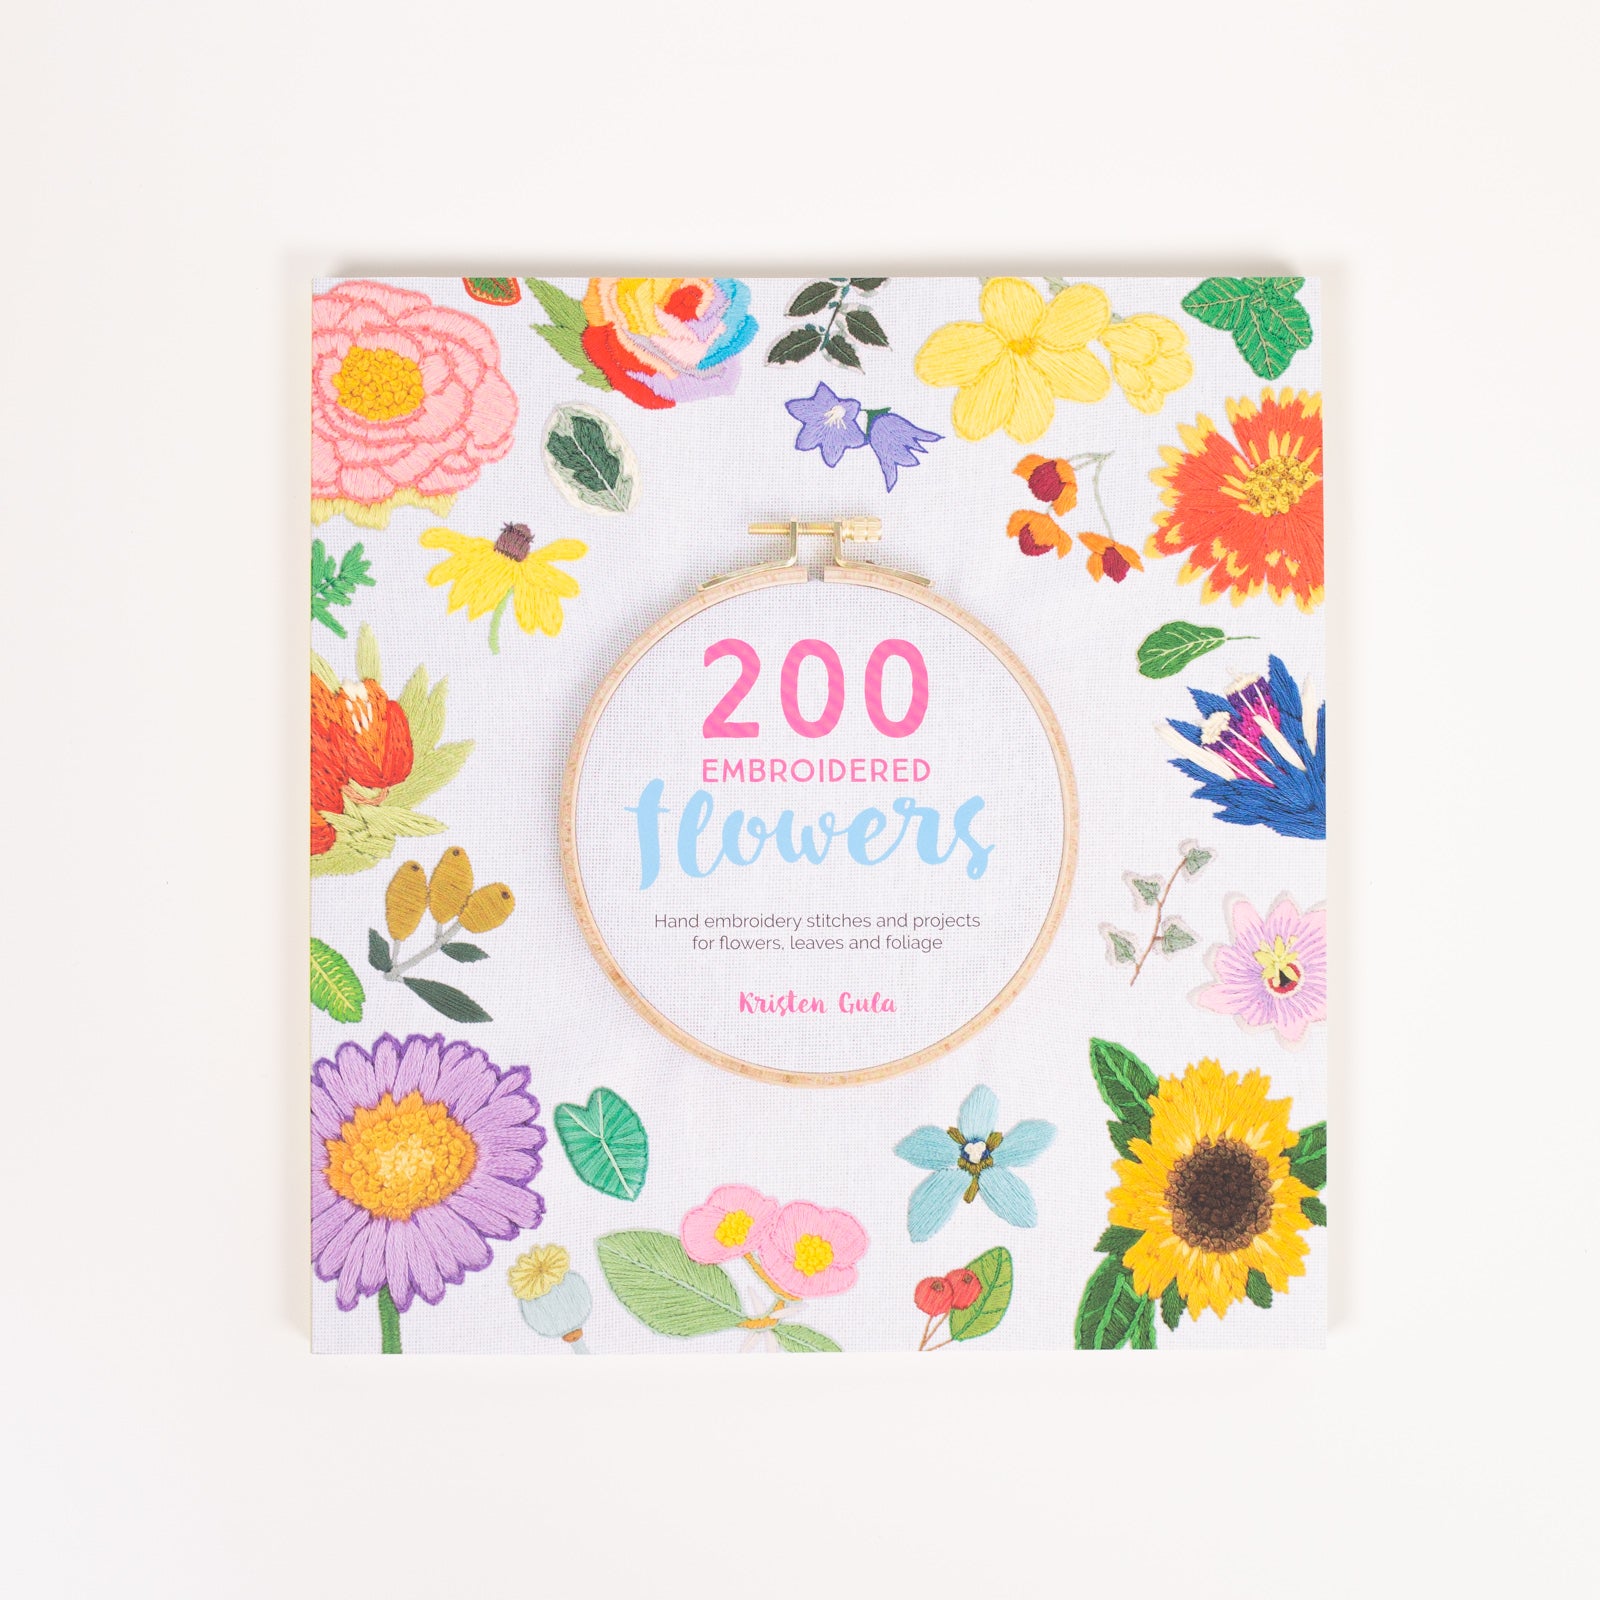 200 Embroidered Flowers' by Kirsten Gula